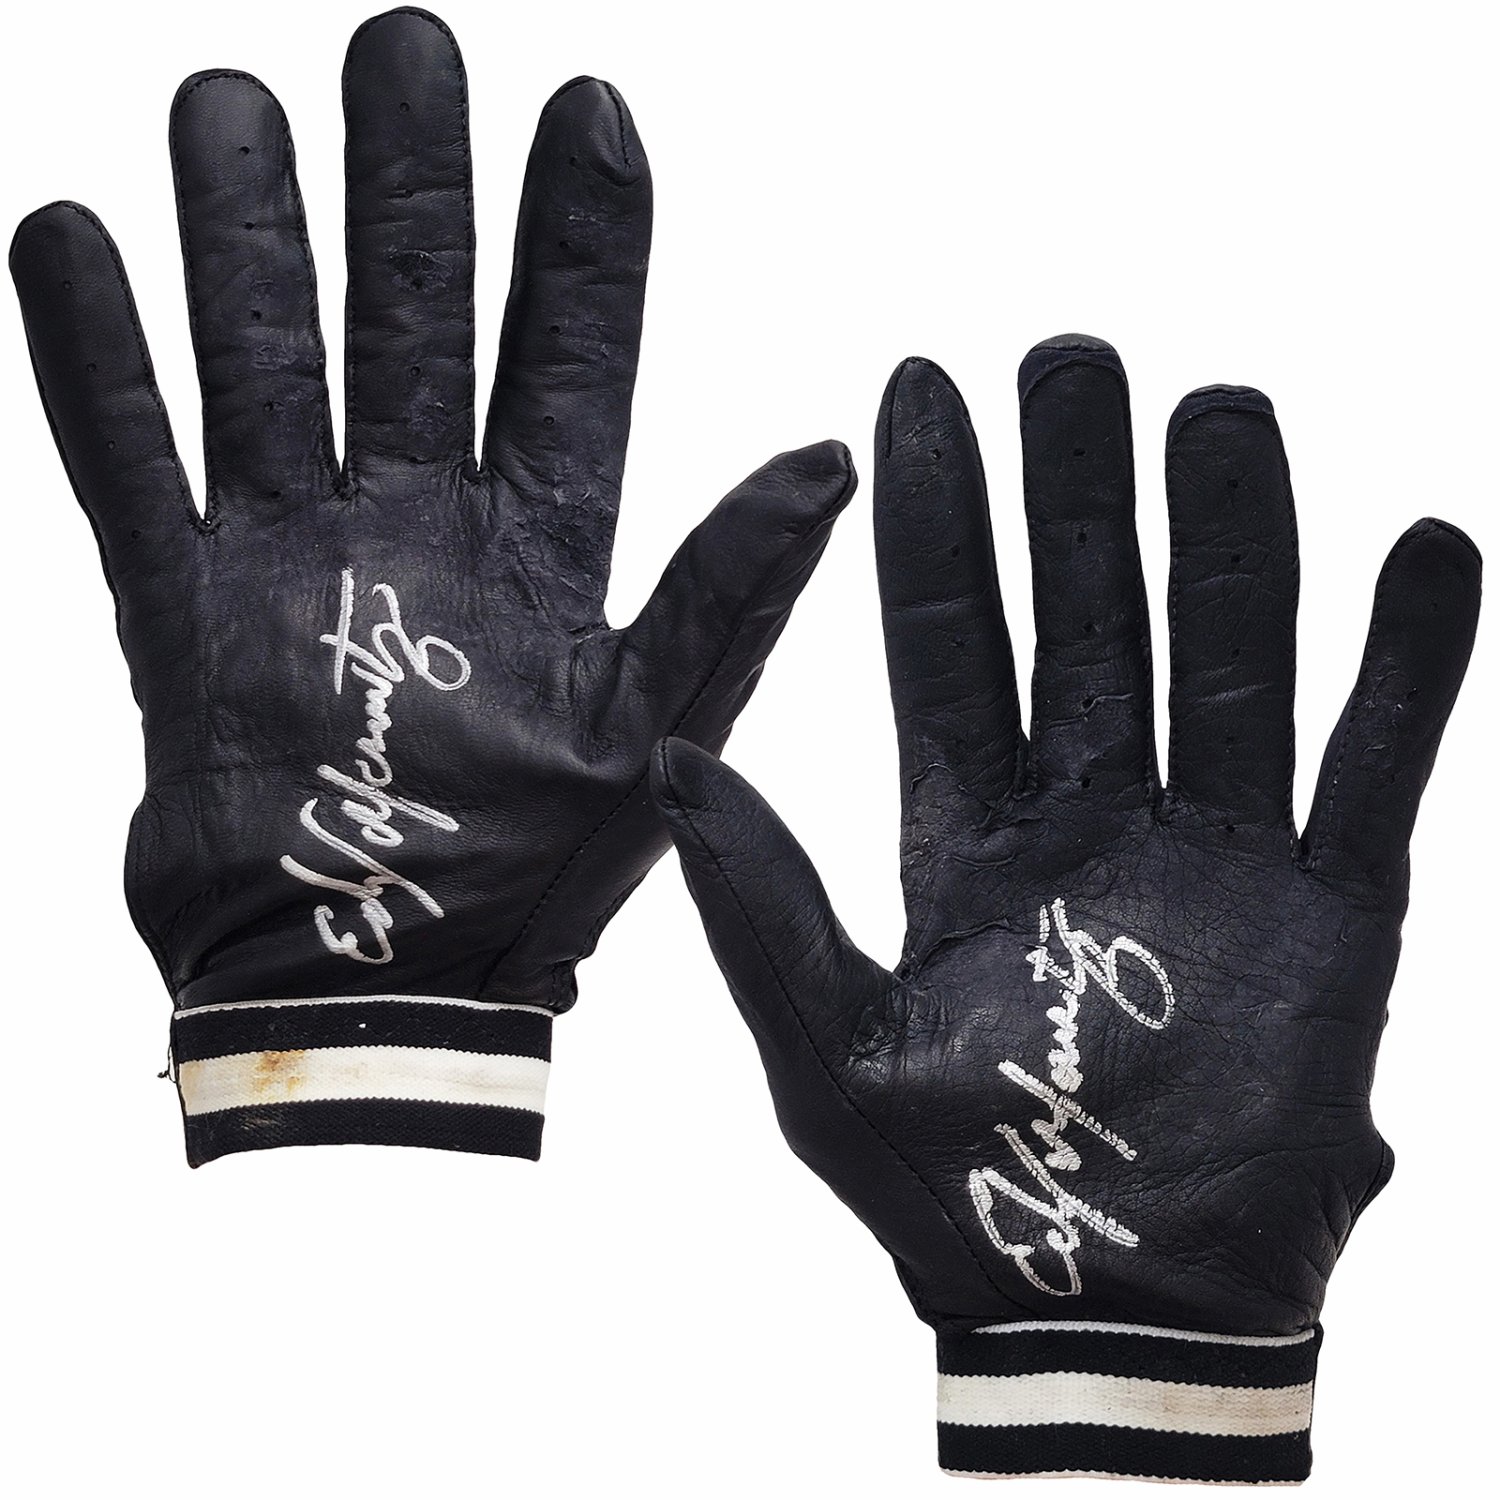 Edgar Martinez Autographed Signed Franklin Game Used Black Batting Gloves  Seattle Mariners With Certificate